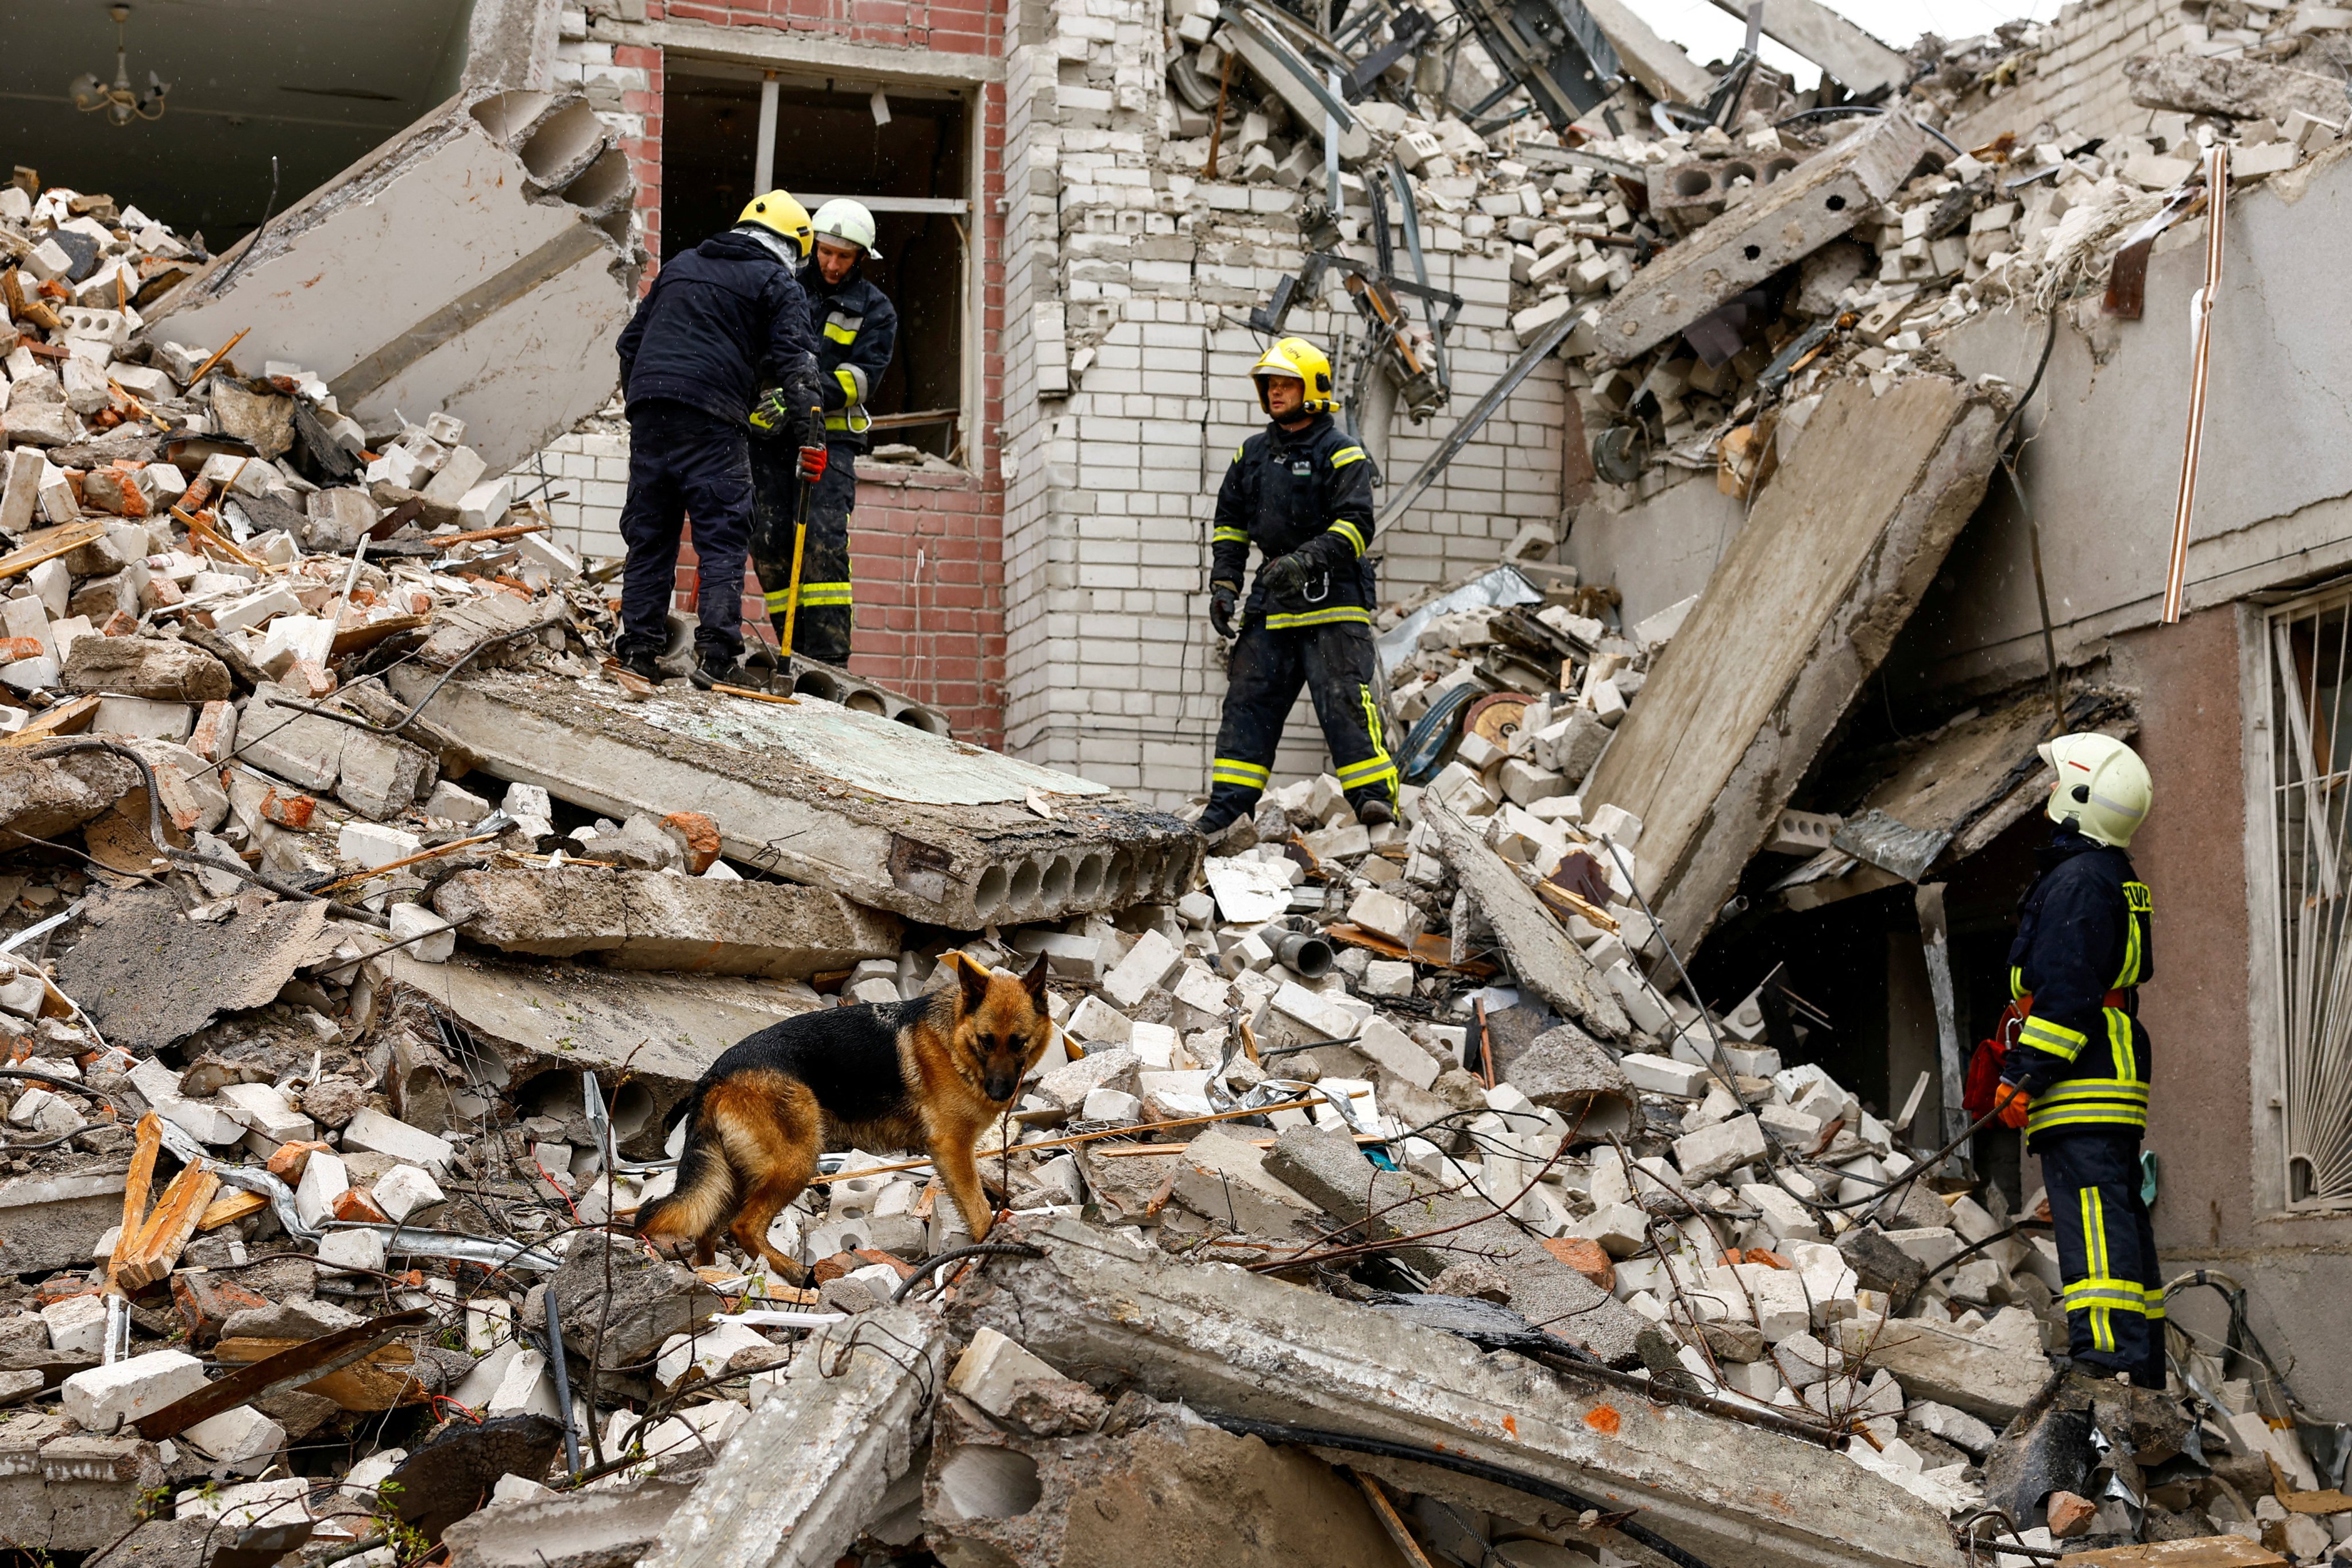 A dog stands on rubble as rescuers work at the site of a destroyed building in Chernihiv, Ukraine on Wednesday. Photo: Reuters